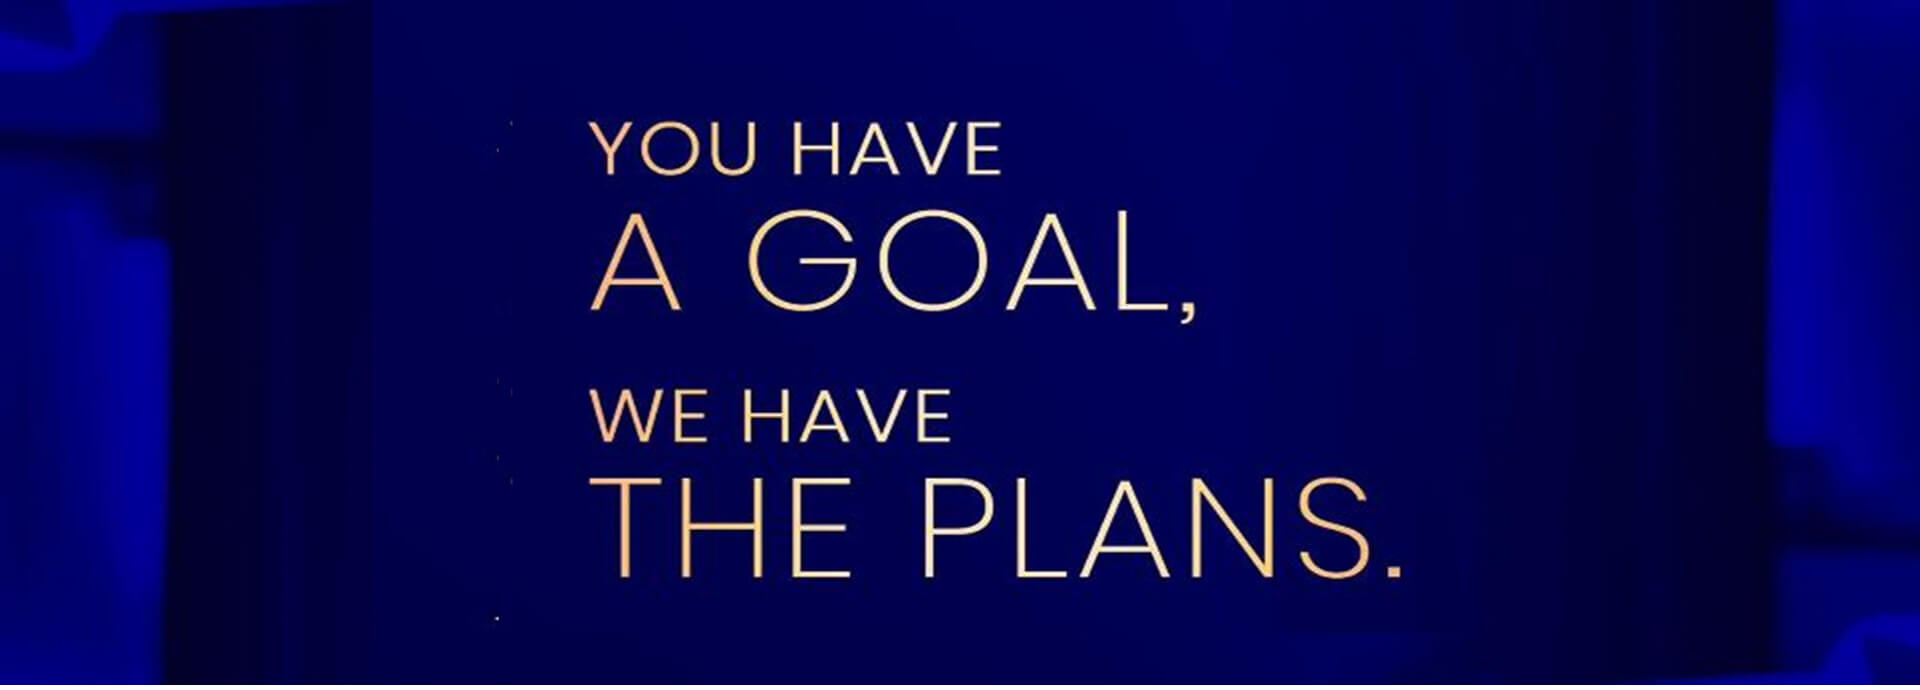 You have a goal, we have the plans.